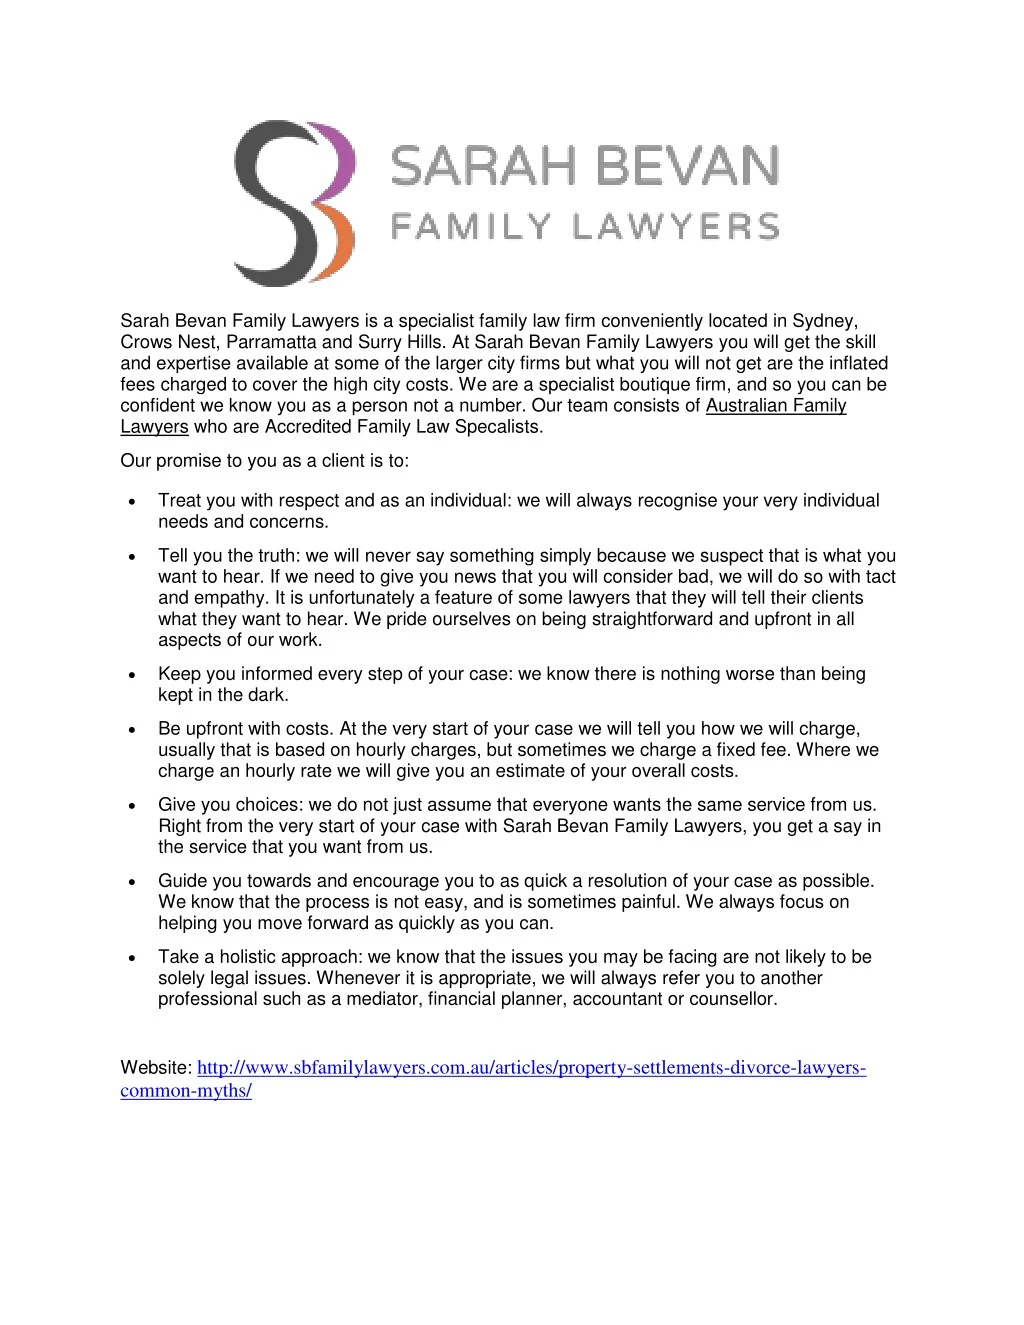 sarah bevan family lawyers is a specialist family